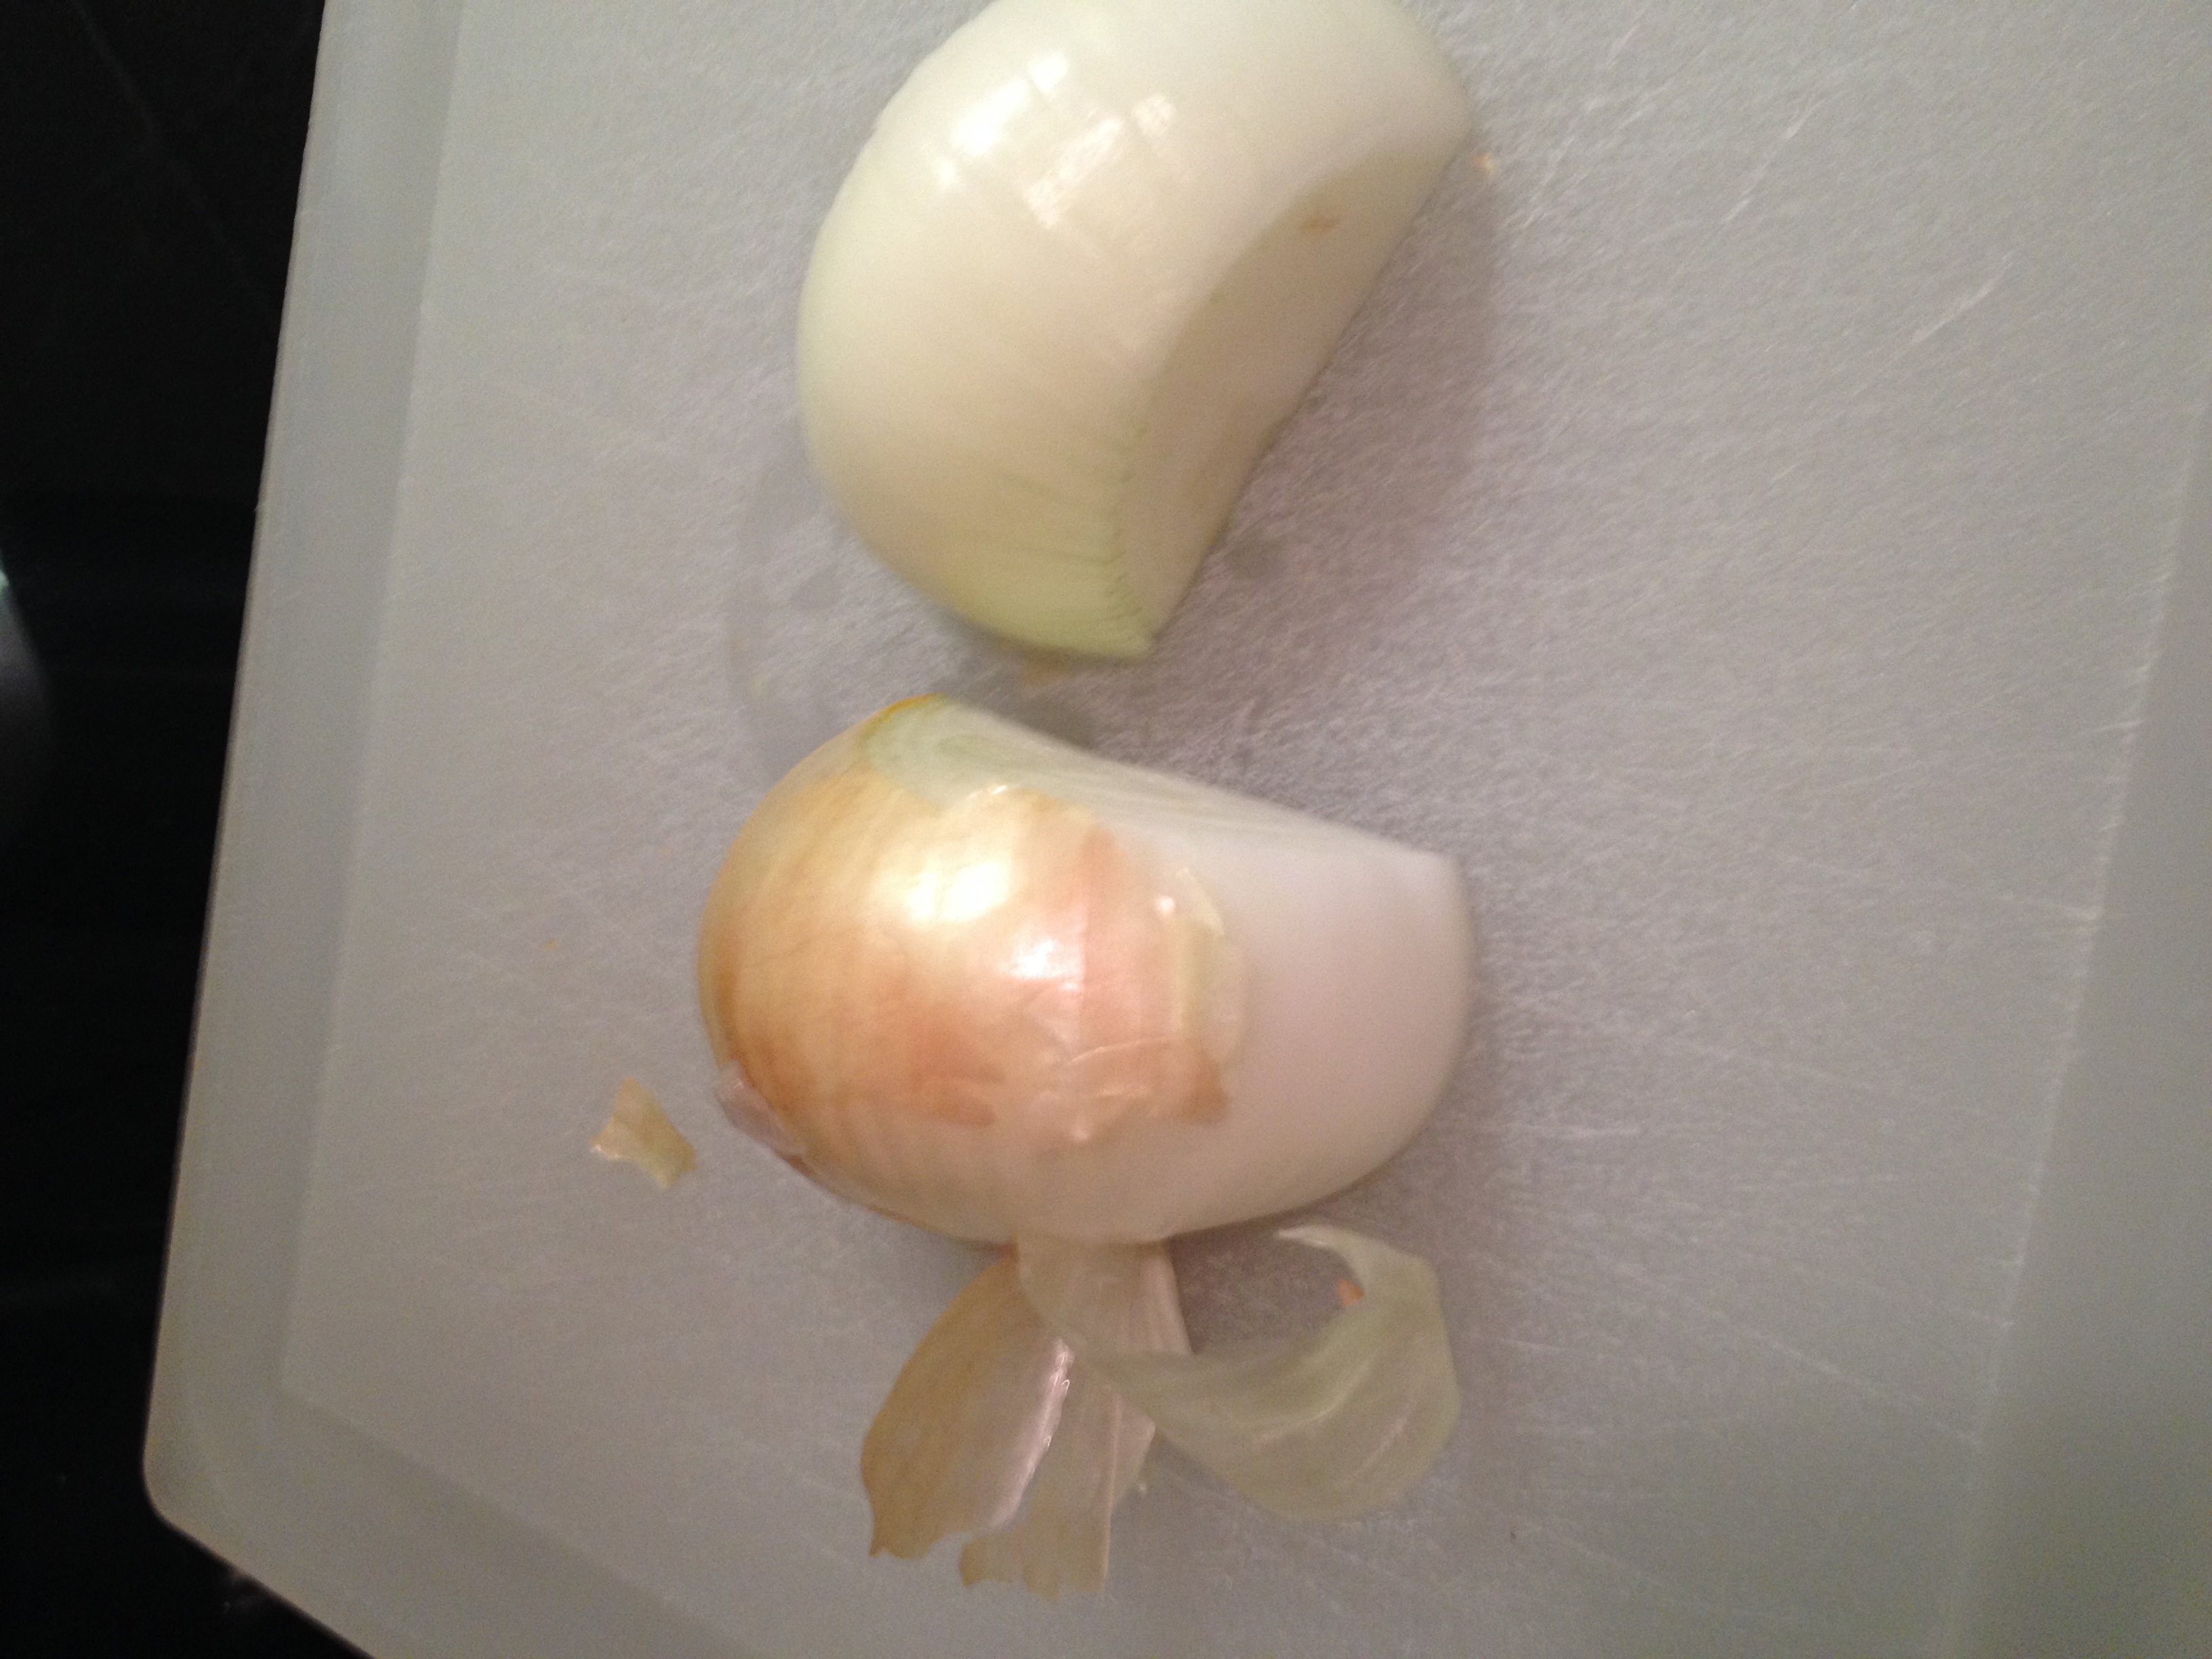 Step 3:  Cut the onion in half and peel.